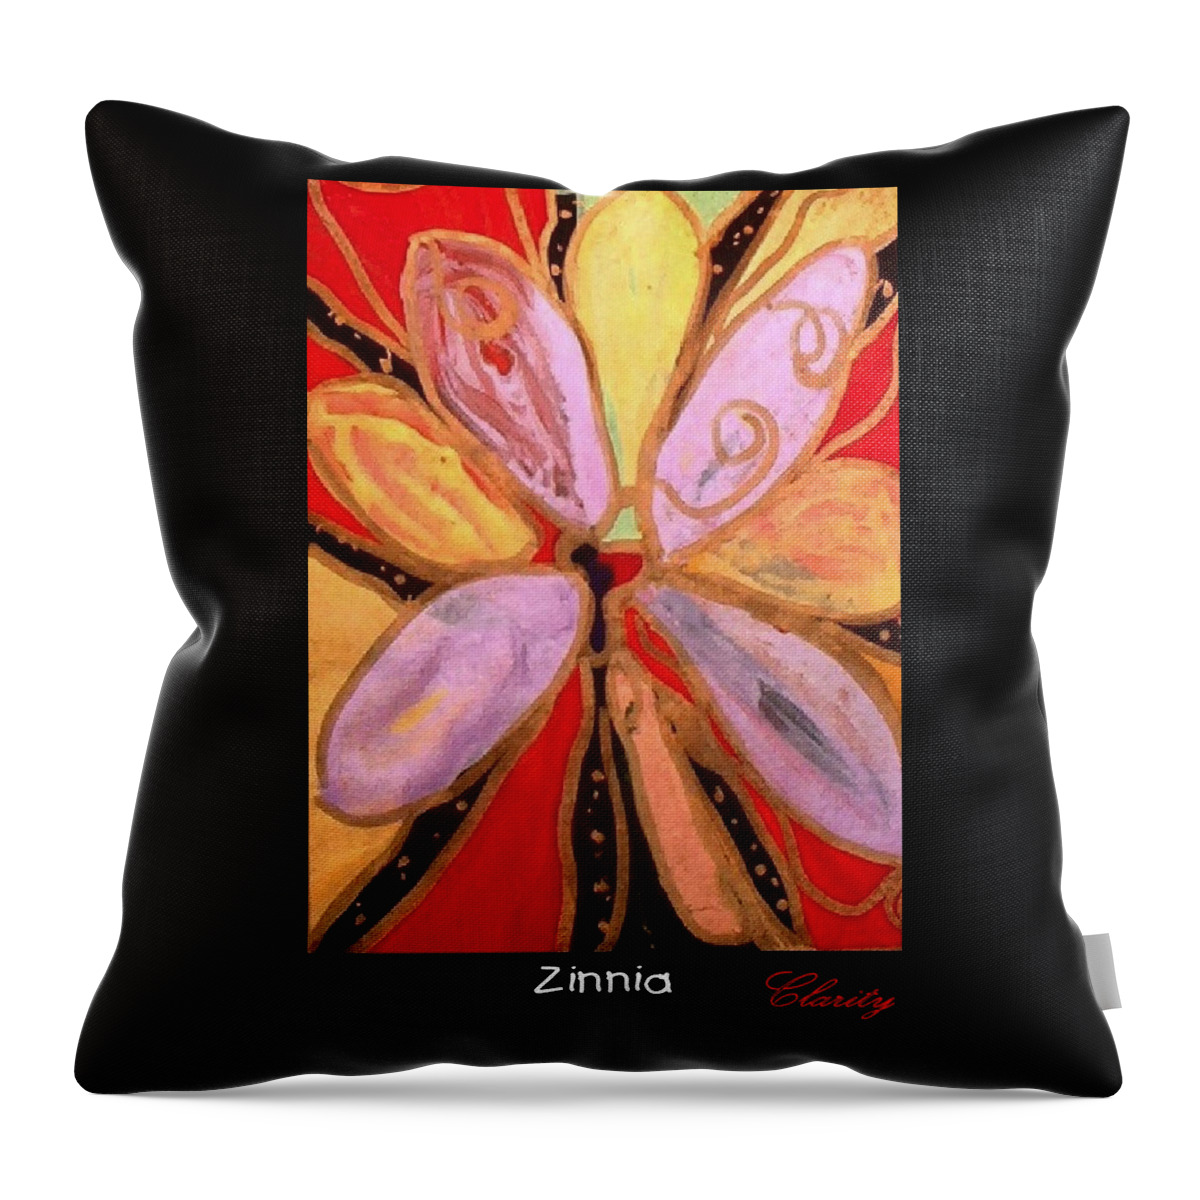 Zinnia Throw Pillow featuring the painting Zinnia by Clarity Artists